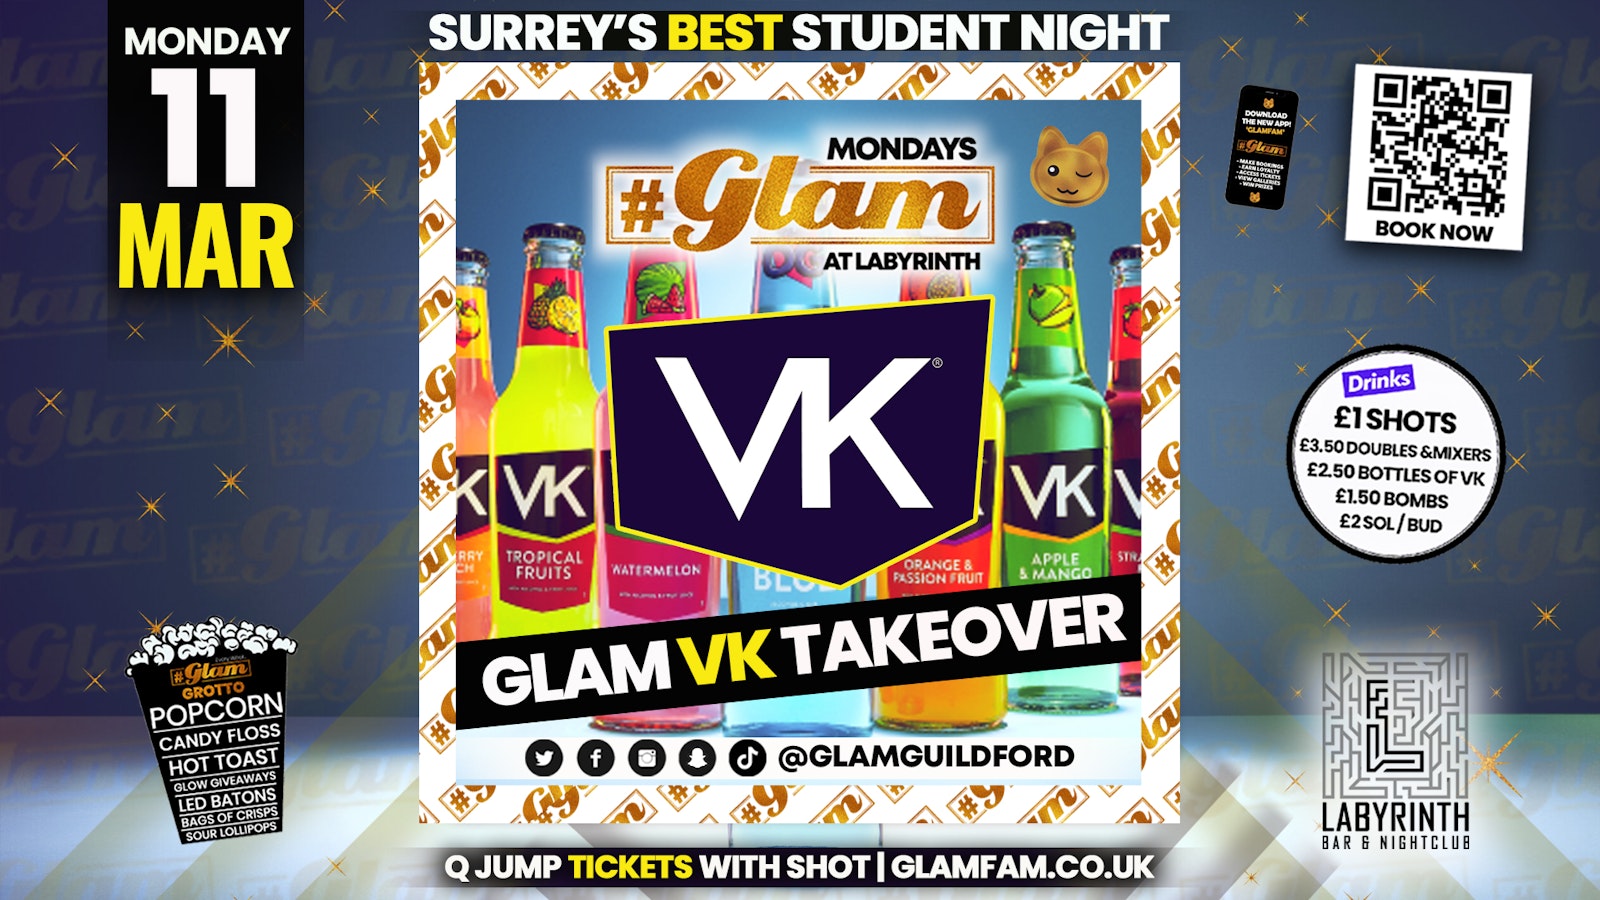 Glam – Surrey’s Best Student Events! VK Takeover! 🤩